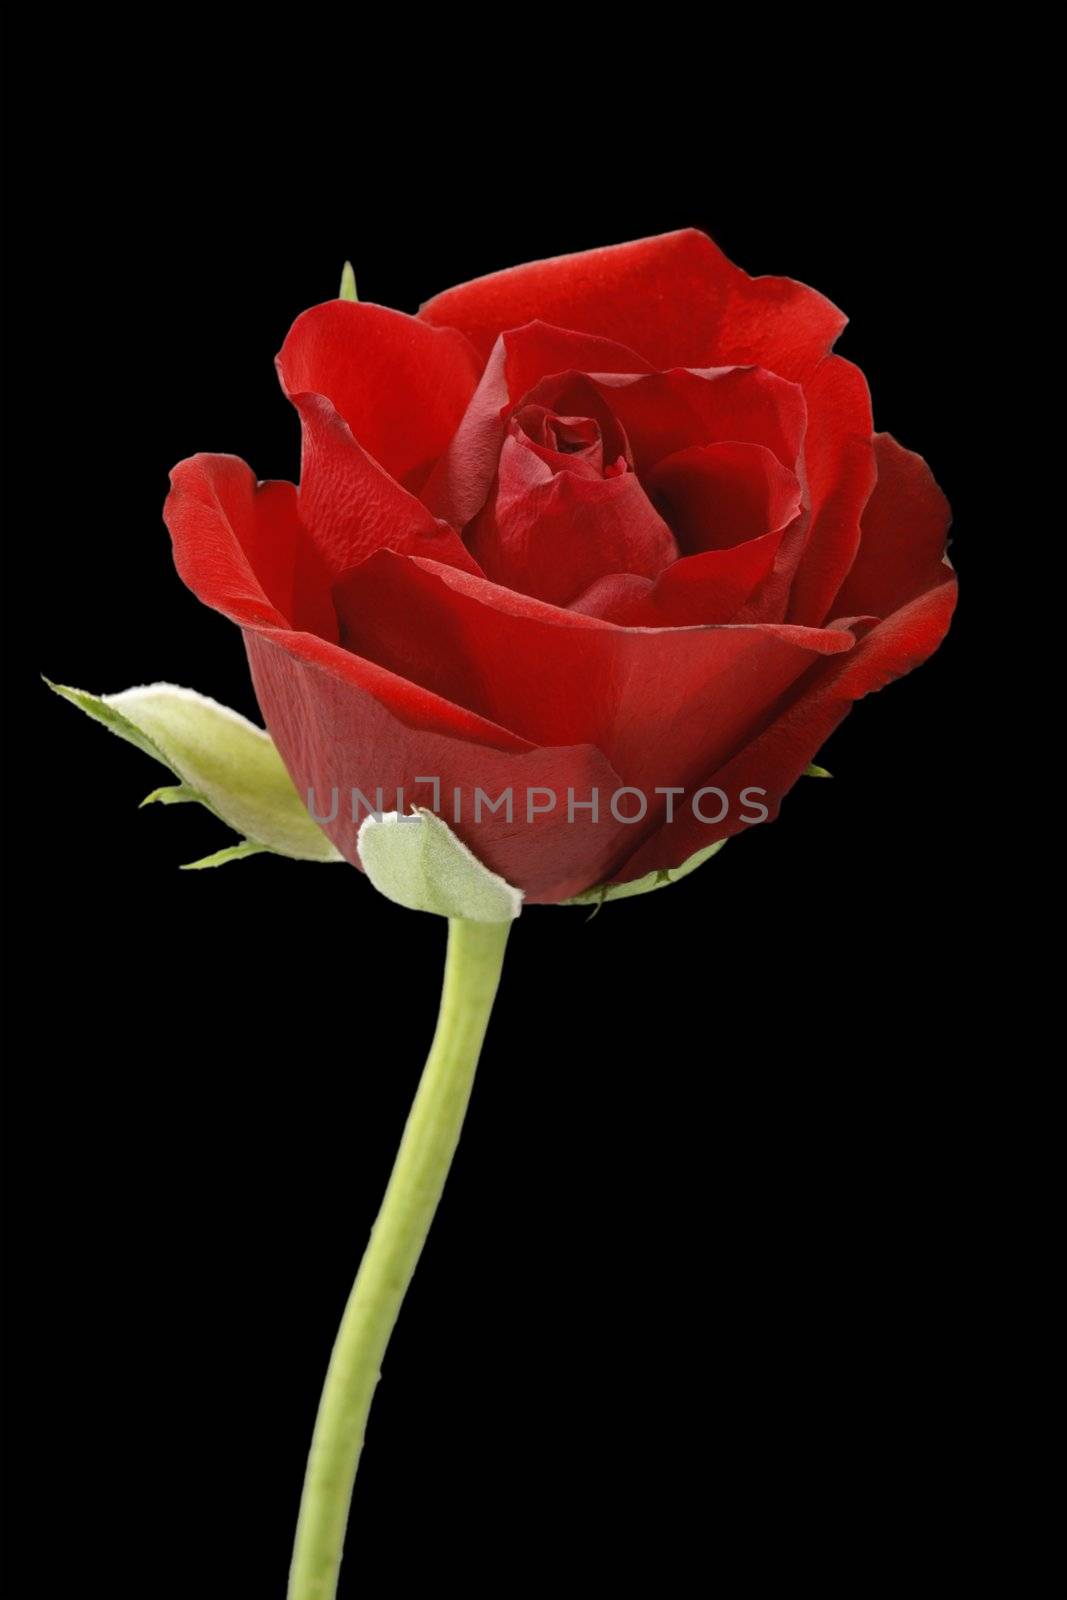 Close-up of a red rose - isolated on black background